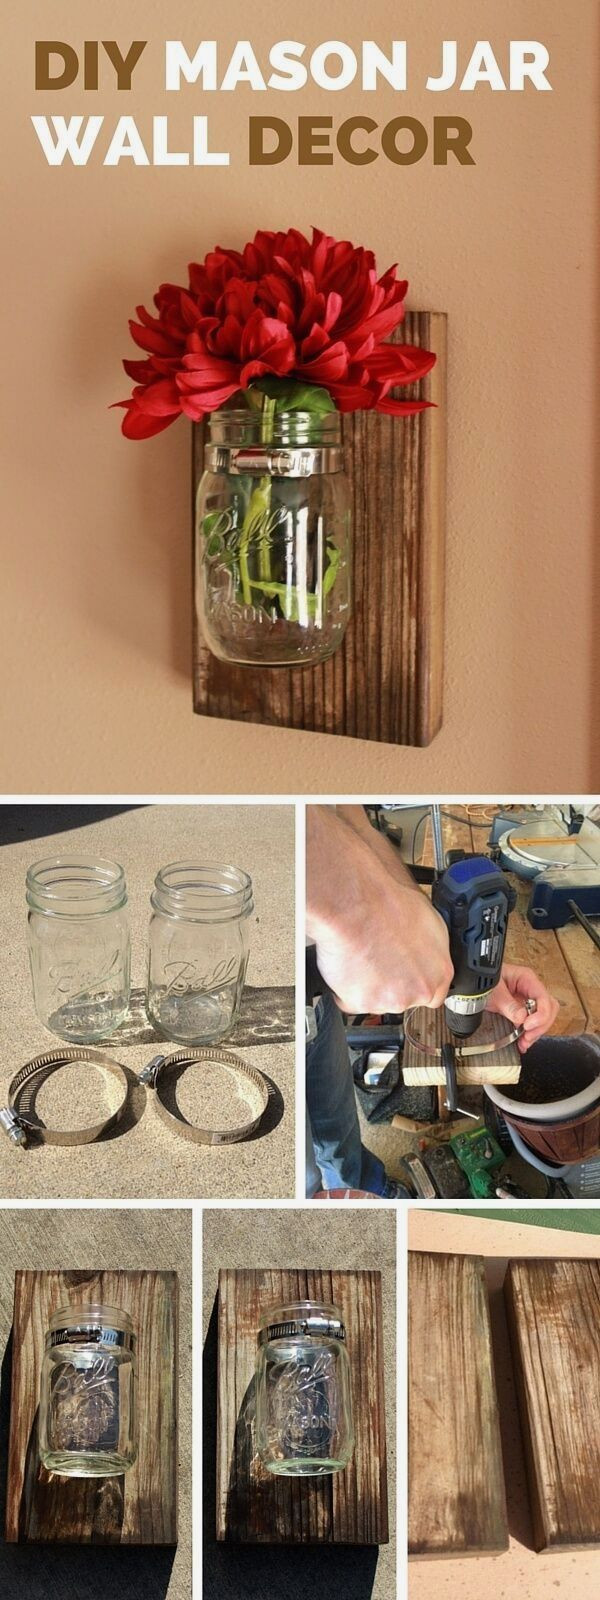 22 Amazing Diy Mason Jar Wall Vase 2024 free download diy mason jar wall vase of 49 best mason jar stuff images on pinterest mason jars creative inside diy rustic home decor ideas are constantly evolving and offering up